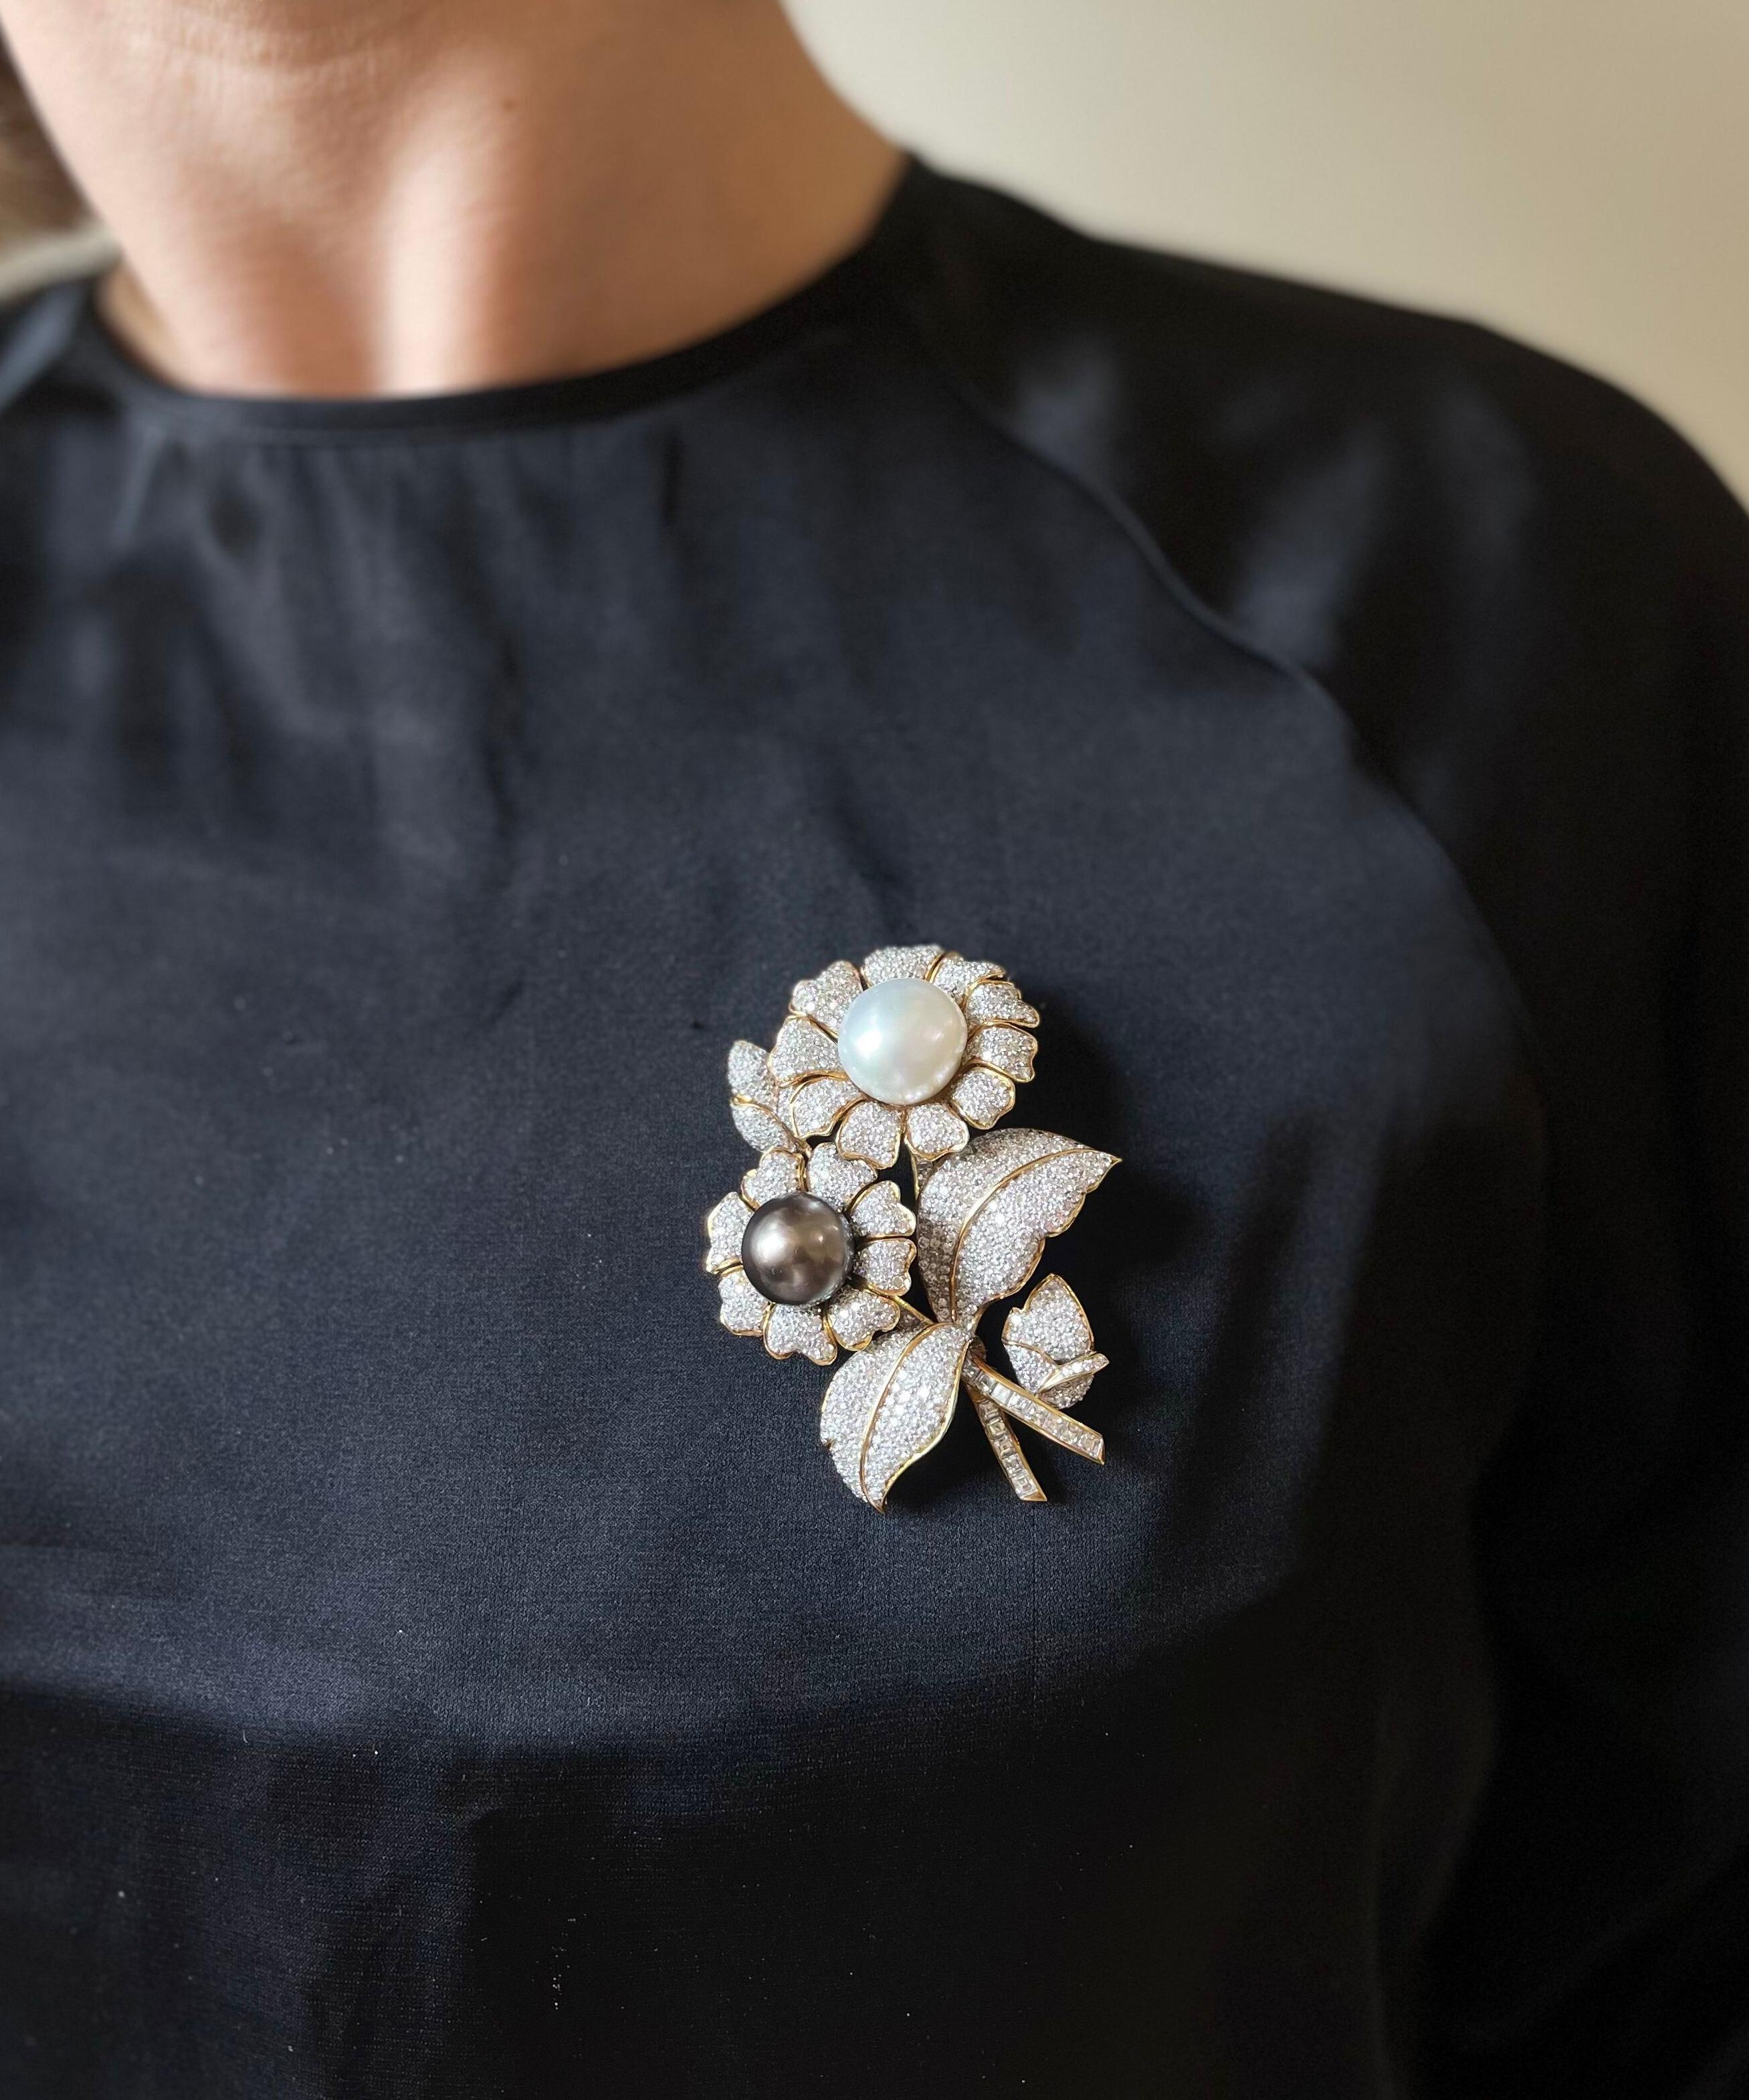 Large 18k gold brooch, depicting two sunflowers, set with a 14.1mm South Sea Tahitian and 16.1mm white South Sea pearl, surrounded with a total of approx. 8-9 carats in SI/H-I diamonds. Brooch measures 2.75